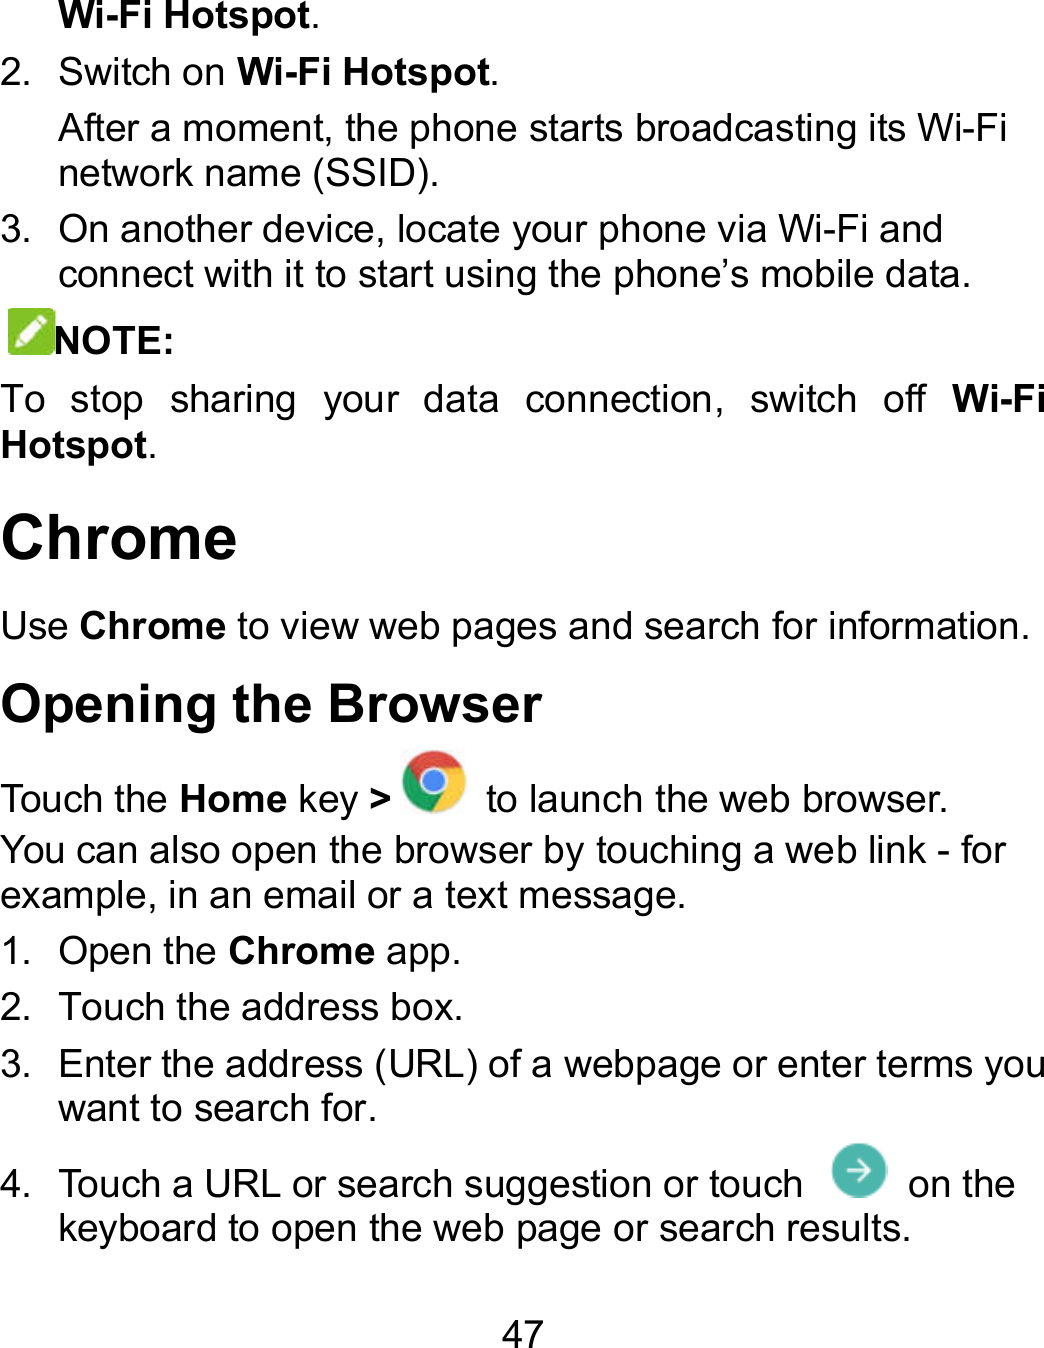 47 Wi-Fi Hotspot.   2.  Switch on Wi-Fi Hotspot.   After a moment, the phone starts broadcasting its Winetwork name (SSID). 3.  On another device, locate your phone via Wi-Fi and connect with it to start using the phone’s mobile data.NOTE: To  stop  sharing  your  data  connection,  switch  off Hotspot. Chrome Use Chrome to view web pages and search for information.Opening the Browser Touch the Home key &gt; to launch the web browser.You can also open the browser by touching a web link example, in an email or a text message. 1.  Open the Chrome app. 2.  Touch the address box. 3.  Enter the address (URL) of a webpage or enter terms you want to search for. 4.  Touch a URL or search suggestion or touch   on the keyboard to open the web page or search results. Wi-Fi Fi and connect with it to start using the phone’s mobile data.  Wi-Fi information. to launch the web browser. You can also open the browser by touching a web link - for enter terms you on the  